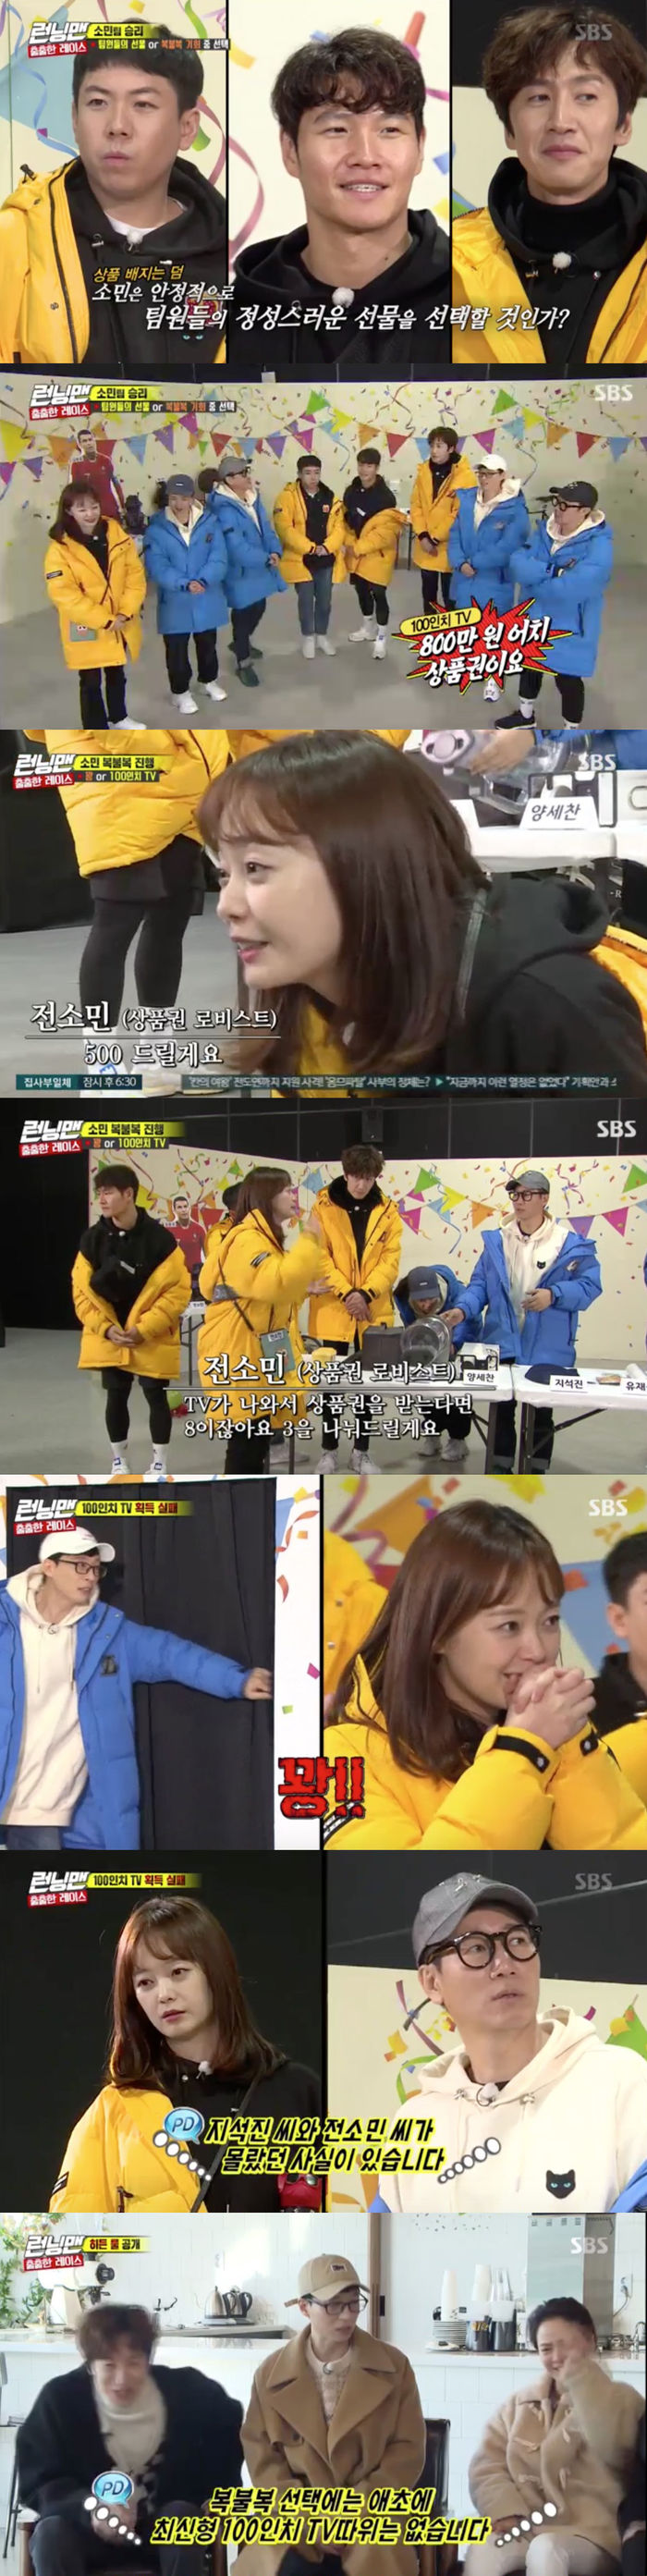 Jeon So-min reveals his desire for winning GiftOn SBS Running Man broadcasted on the 9th, Race was released.On this day, Ji Suk-jins birth and the publication of Jeon So-min were held to celebrate the publication of the race.And the crew also prepared a customized cake for the two to celebrate the joy of the two.The race was played by Jeon So-min and Ji Suk-jin as team leaders of each team.The final winner will have the opportunity to win all of his teams Gifts or to win 100-inch TV worth 8 million won with a 50% chance.However, when the Bokbulbok Show Choices were hit by the Choices, it was the rule that the team member would get the object to throw away.It was also possible to receive a gift certificate worth 8 million won instead of TV.And the member with the least amount of product badges acquired during the mission will be punished.Jeon So-min chose Sechan, Gwangsu and the Final, and Ji Suk-jin hosted the Race by Choices the Yoo Jae-Suk, Song Ji-hyo and Haha.The mission result saw Jeon So-mins team win the championship by winning two first, and Jeon So-min chose the Bokbulbok Show product without much trouble.In particular, Jeon So-min did not abandon his greed even though a product badge was paid to his team members only when Choices 100-inch TV.In addition, Jeon So-min laughed at the production team to get a TV, saying, If you change it to a gift certificate, I will give you 500, let me know where the TV is.After agonizing, Jeon So-mins Choices were No. 1 followed by Jeon So-mins Choices-in-Gift was revealed; it was the right thing Jeon So-min picked out was the bang.So, Jeon So-min denied the reality, saying, Did not you really change it? Yoo Jae-Suk said, Why did you have Choices when all the shit hands are here?And Jeon So-min laughed at Choices the three-inch navigation that Ji Suk-jin brought with him among the items the members wanted to throw away.At this time, the crew surprised Jeon So-min and Ji Suk-jin by saying, Today, there was a fact that only the team leaders did not know.In fact, the crew told other members except the team leader, Bokbulbok Show Choices does not have a 100-inch TV in the first place.It is a race that can not receive any products regardless of the victory or defeat if the team leader is greedy.Jeon So-min, who was greedy, had not won any goods; Jeon So-min, who learned all the facts, grumbled, Why did not you give me a tip?Kim Jong Kook laughed, saying, I could not talk because I saw my eyes in the first place.